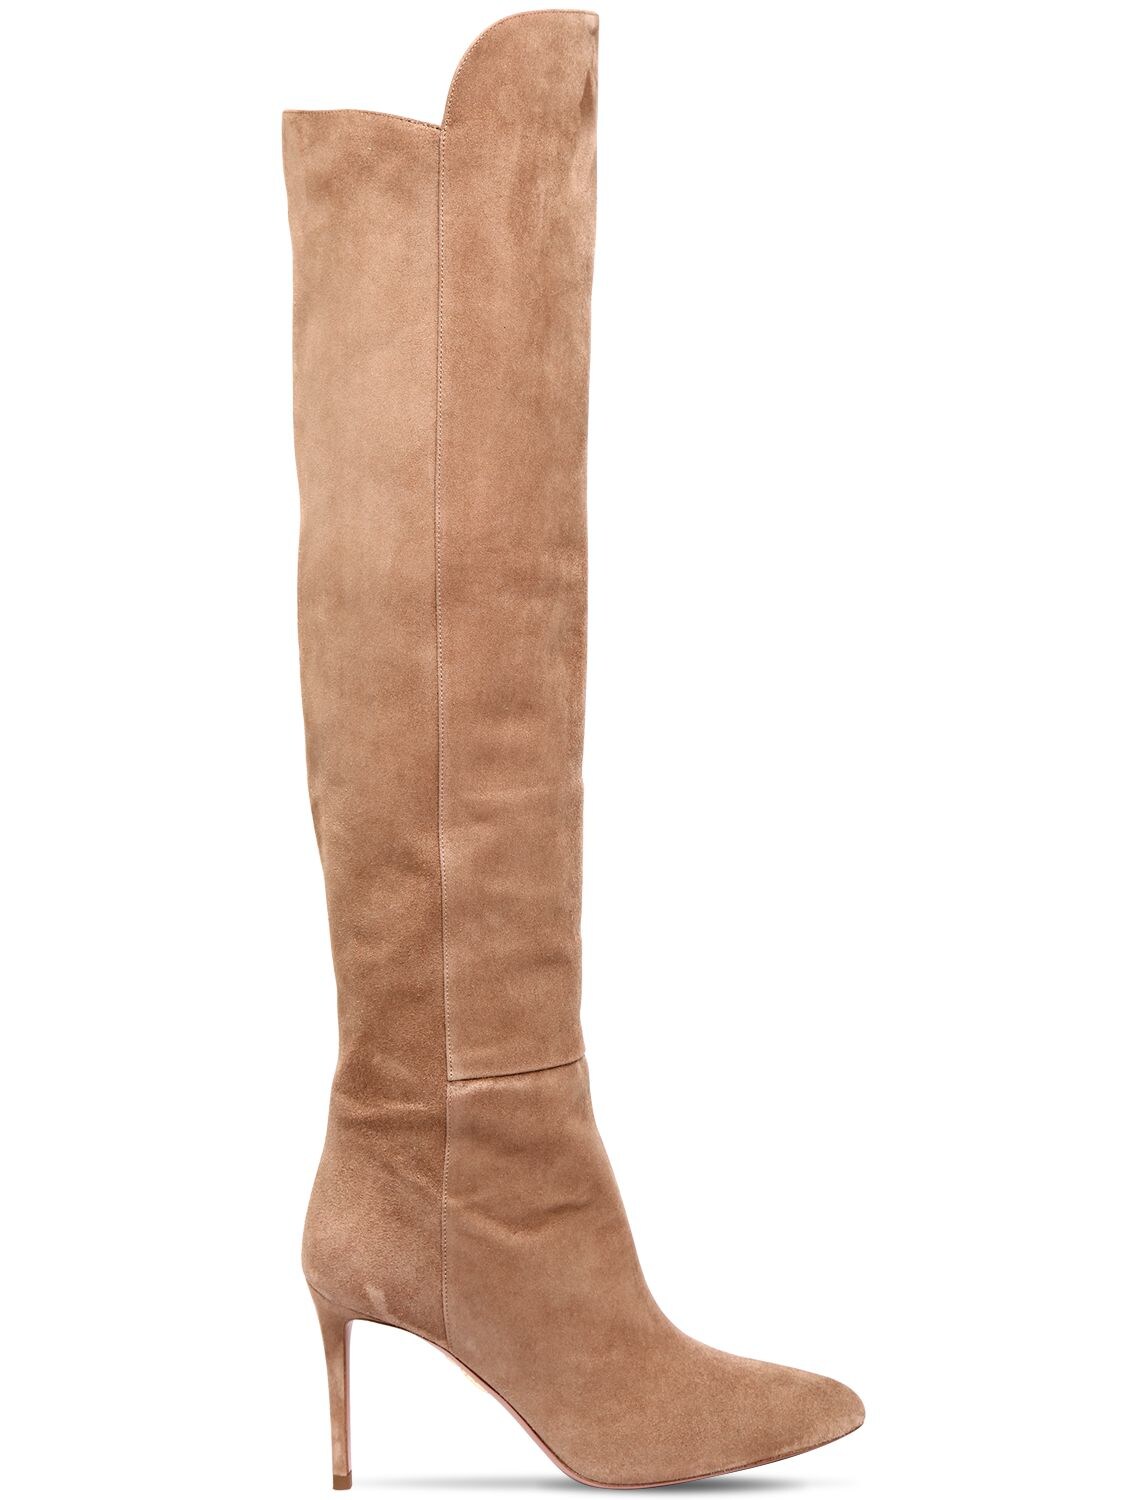 AQUAZZURA 85MM SUEDE OVER THE KNEE BOOTS,68ILNT006-MTAW0